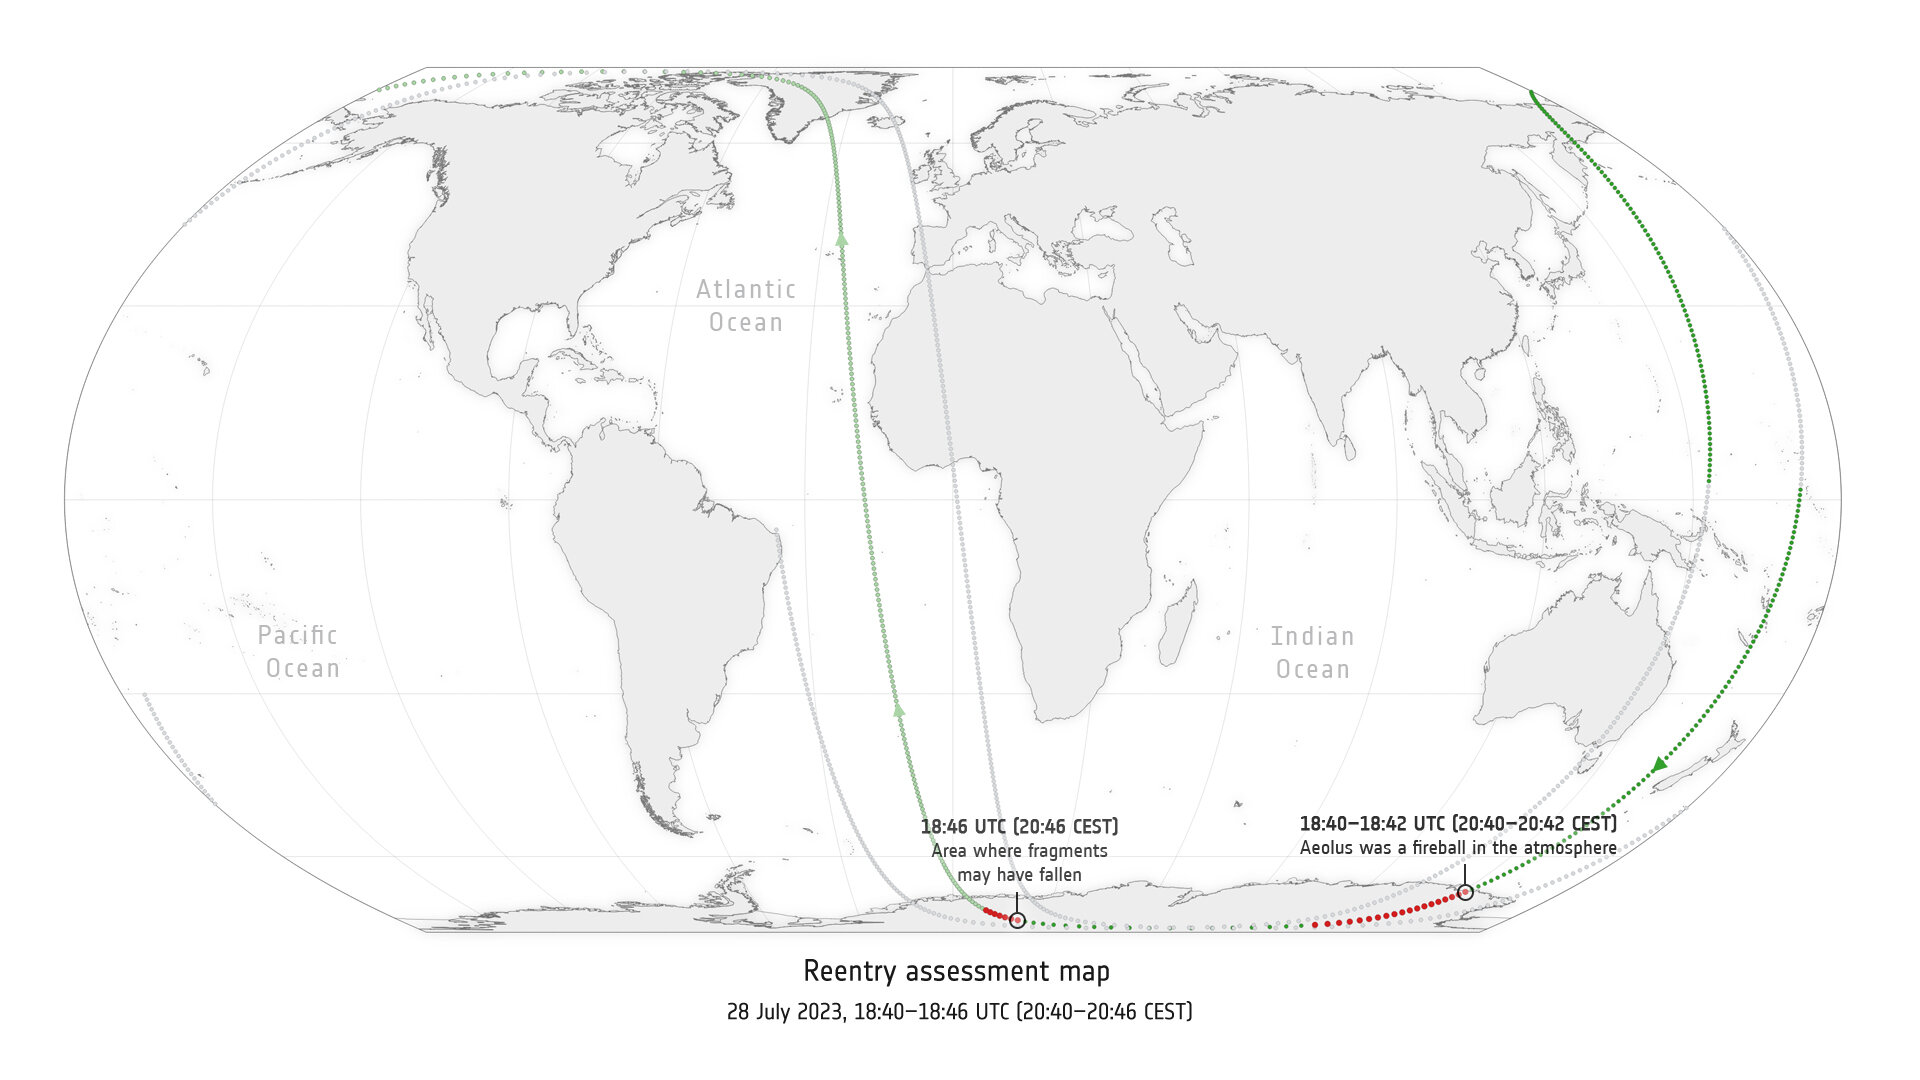 Right on track: Aeolus reentry map